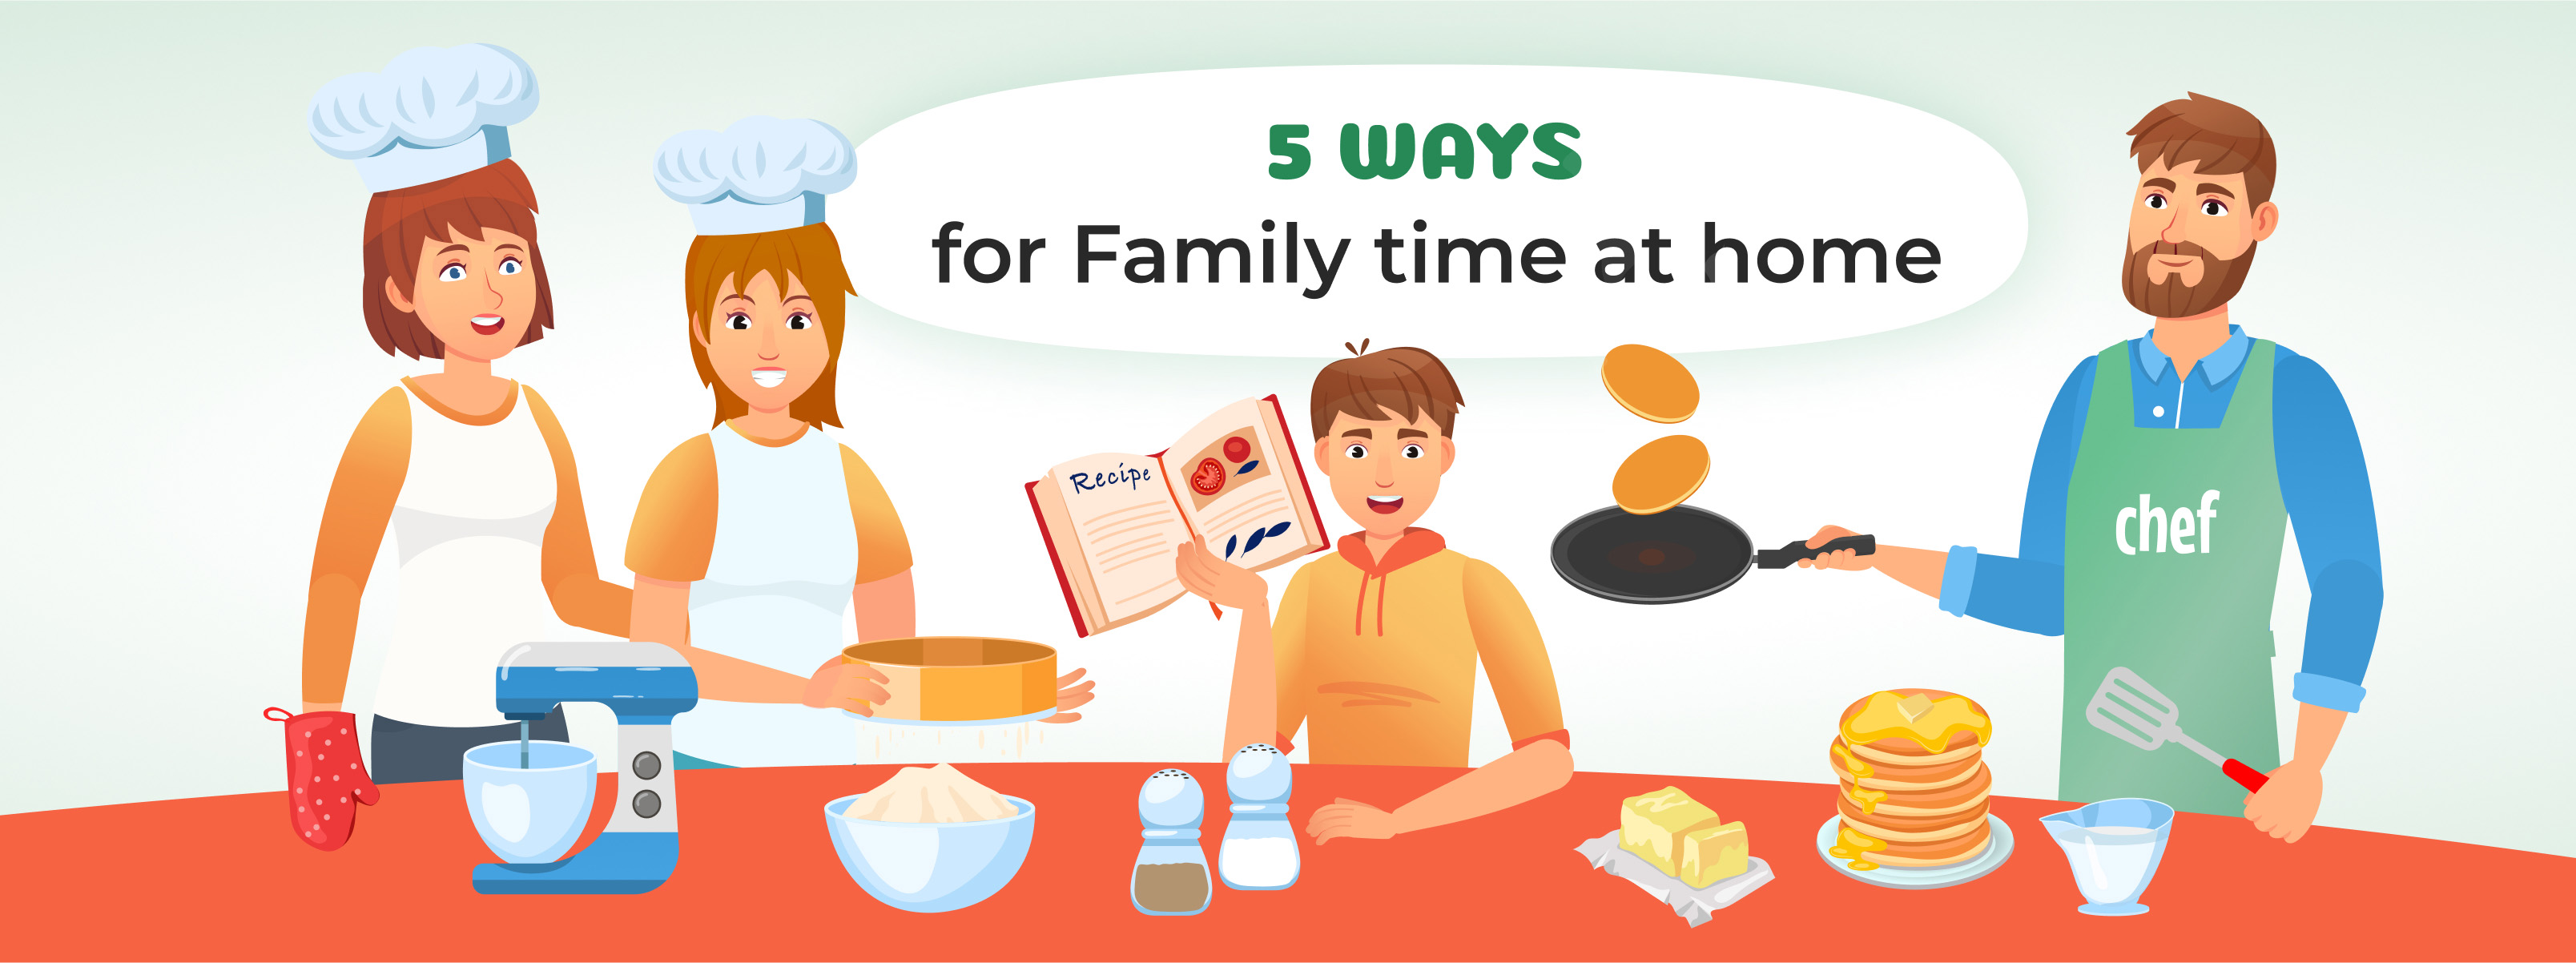 5 Ways for Family Time at Home